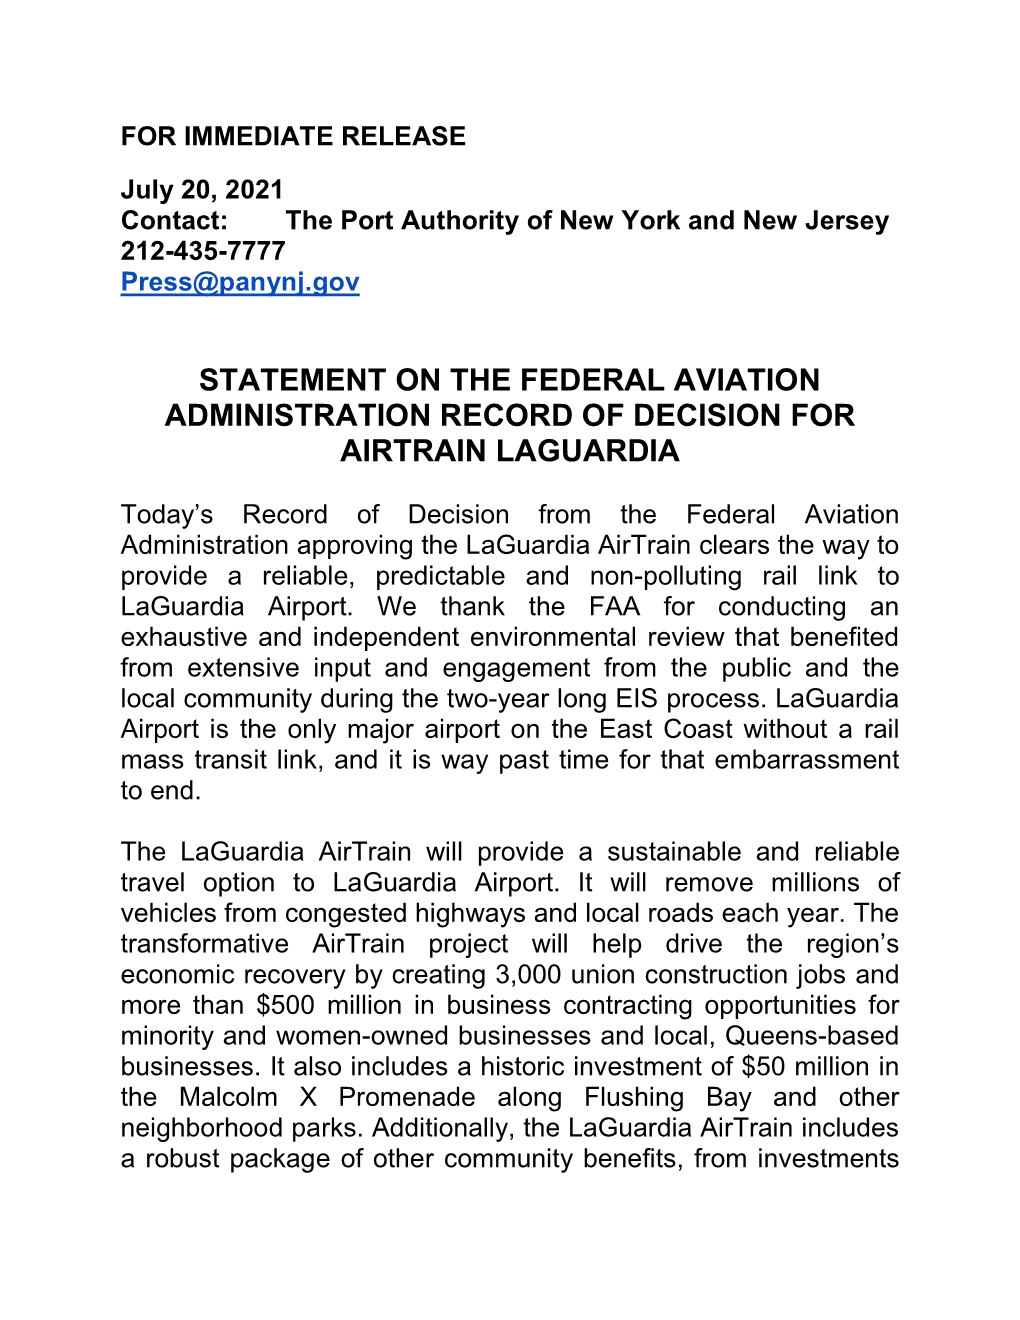 Statement on the Federal Aviation Administration Record of Decision for Airtrain Laguardia